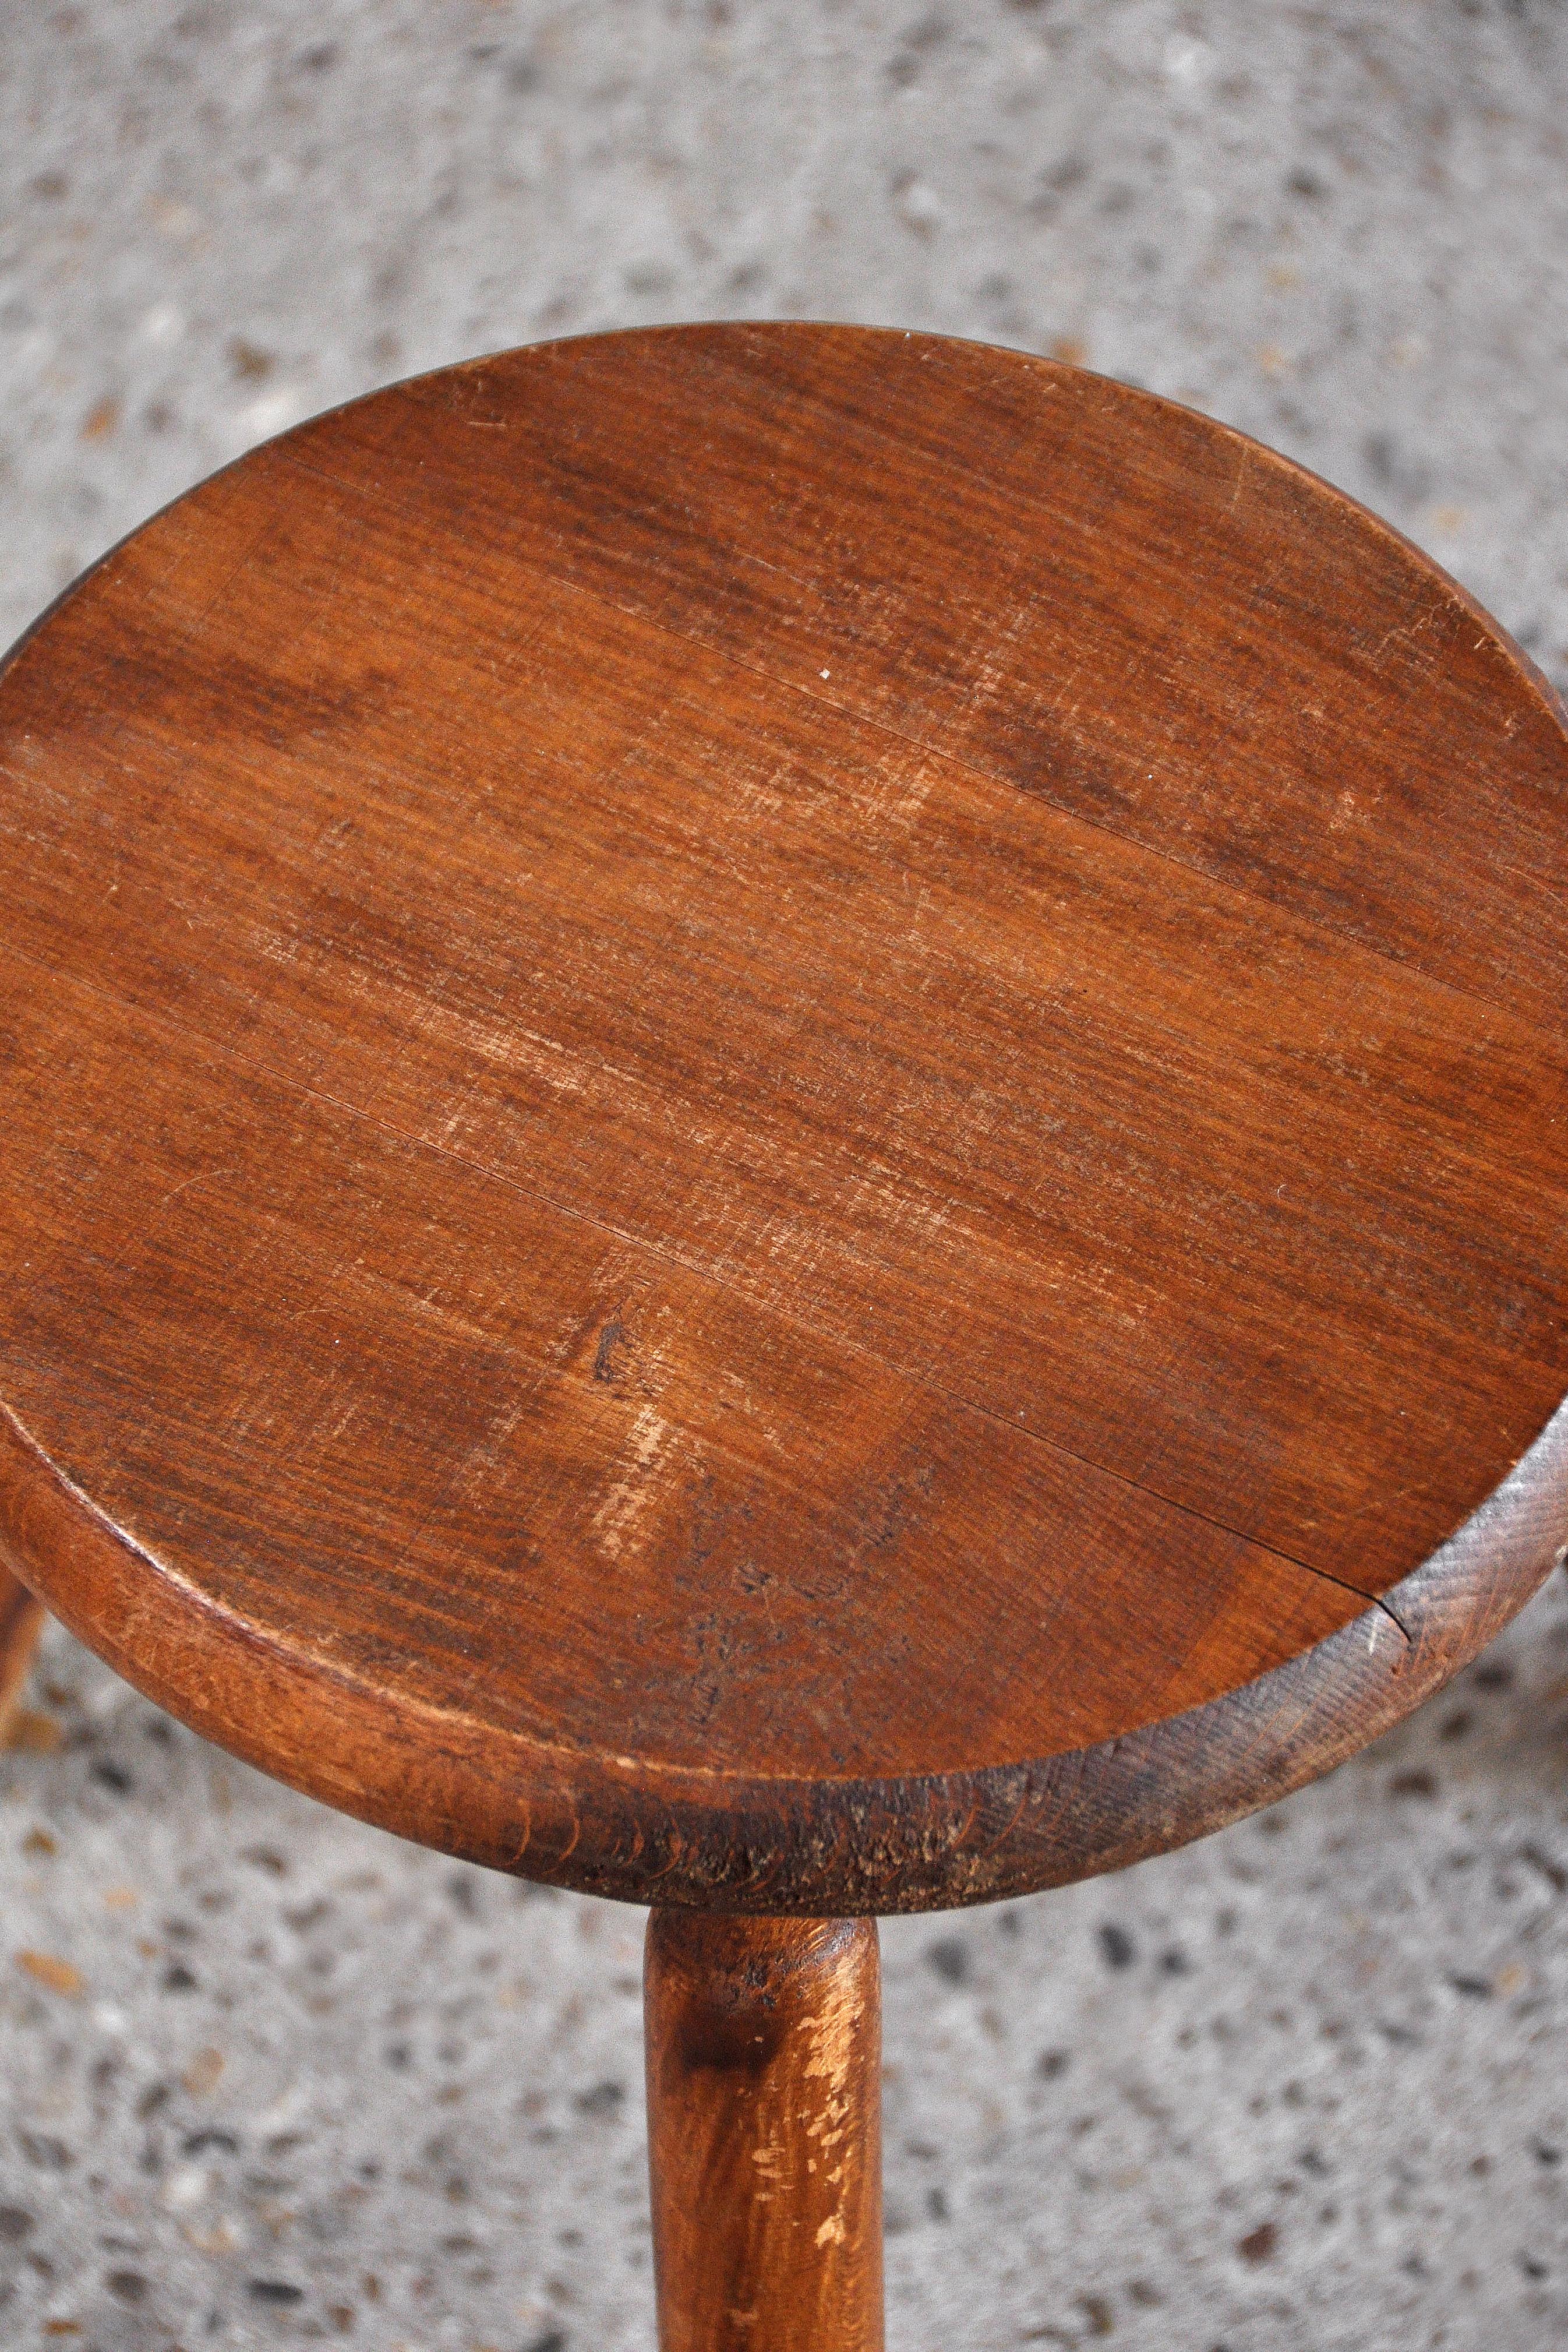 Wood Vintage Stool in the Manner of Charlotte Perriand, France, Mid-20th Century For Sale